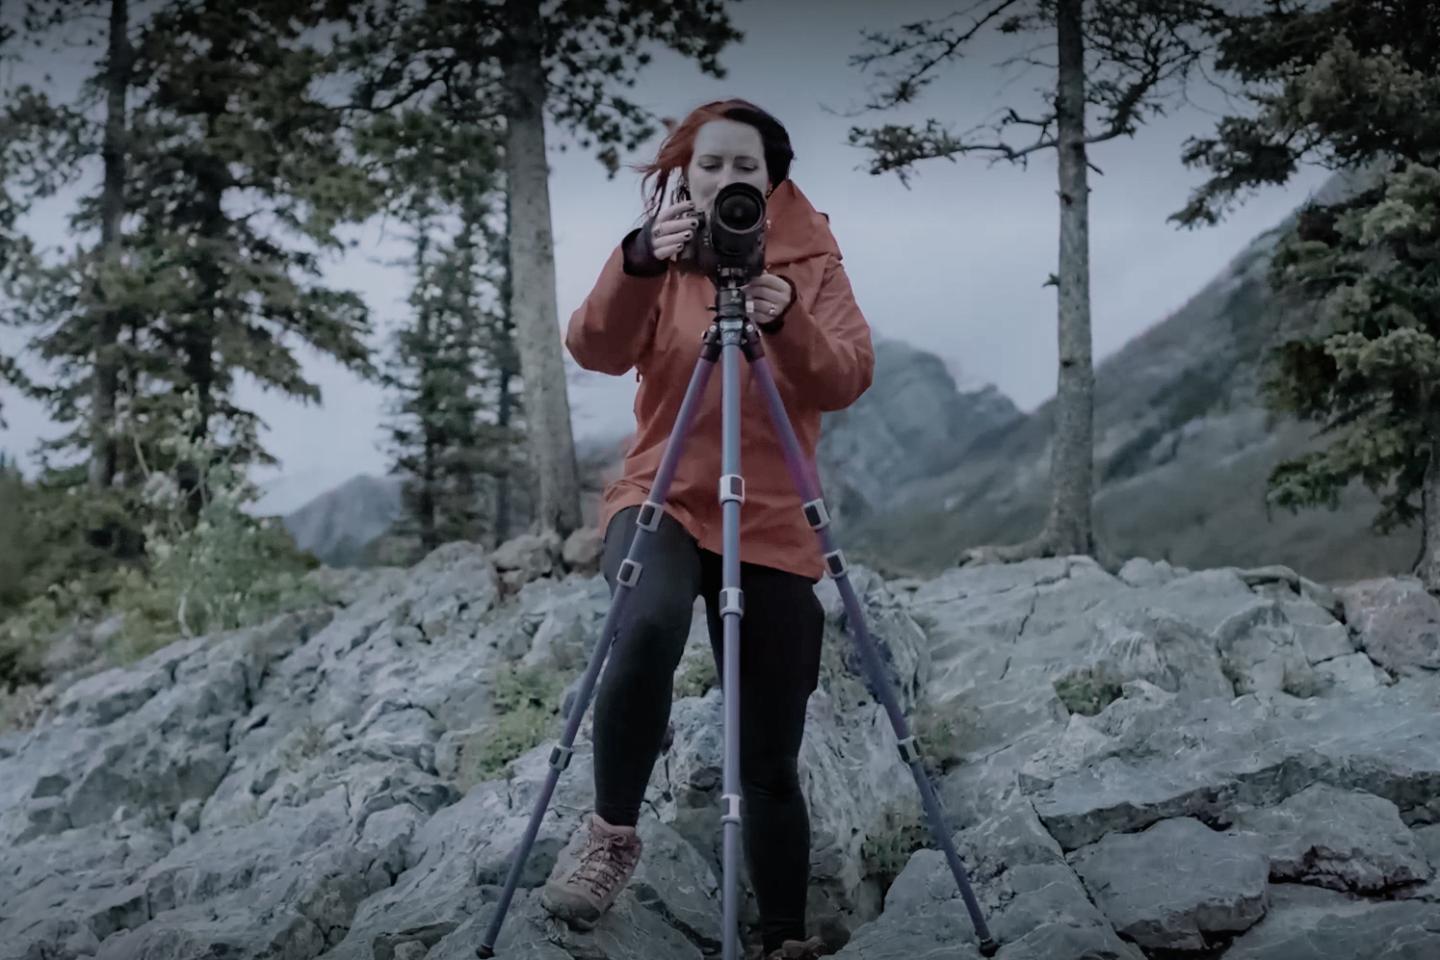 Image of woman wearing a red coat taking a photo using a camera on a tripod, with rocks, trees and mountains in the background